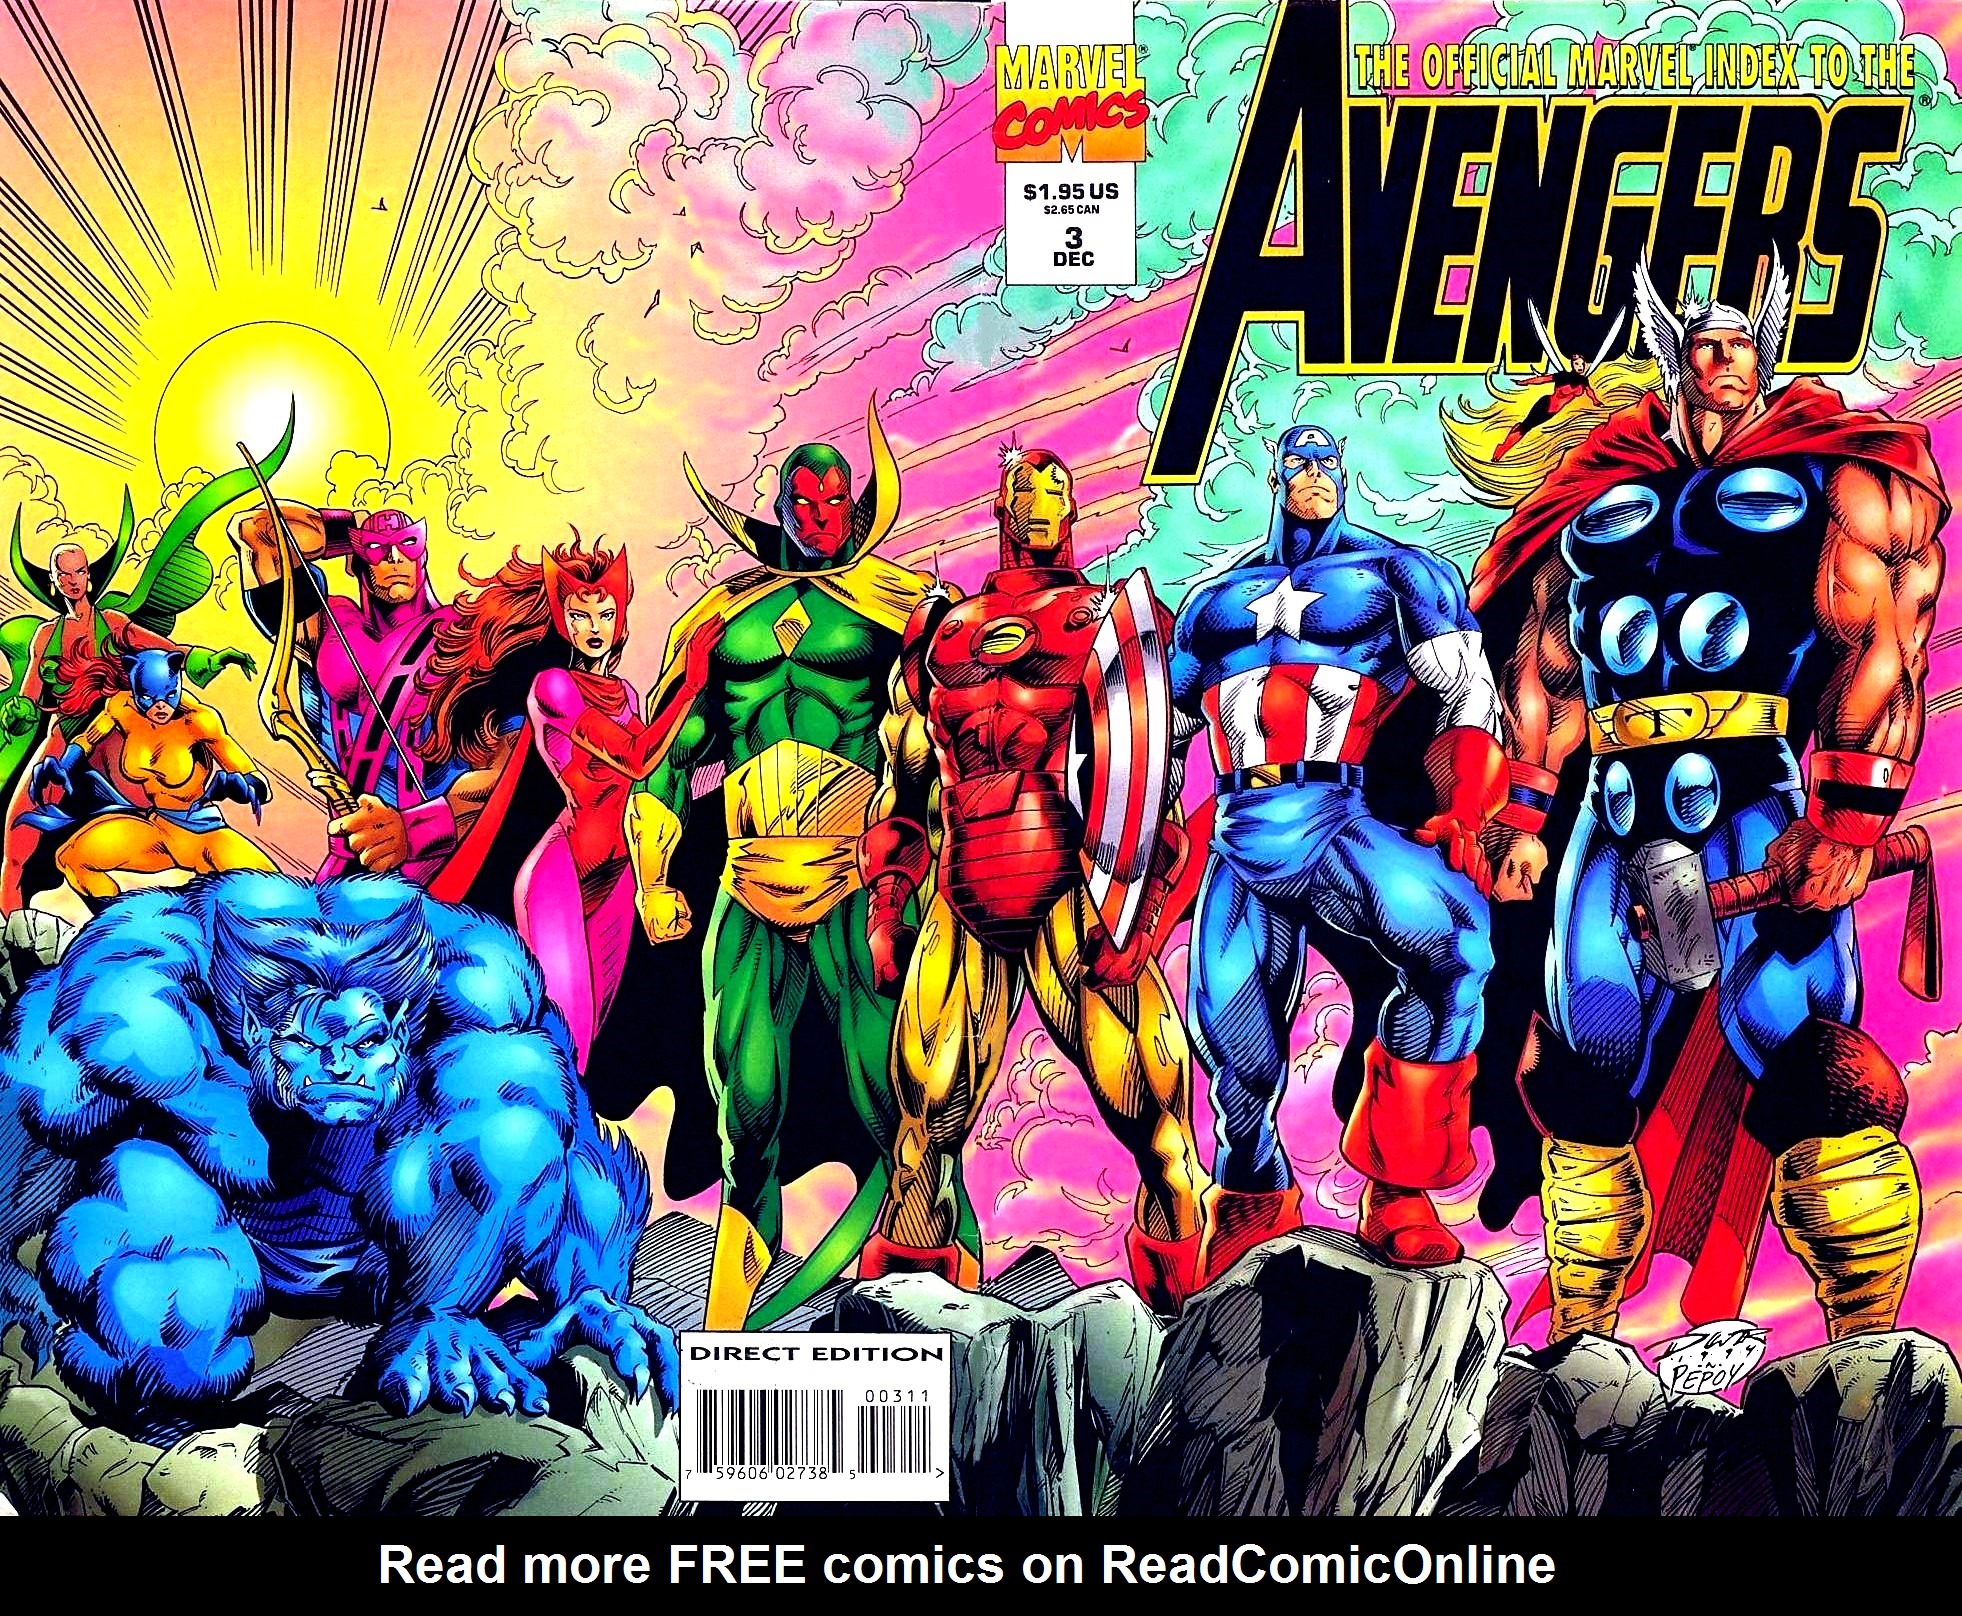 Read online The Official Marvel Index to the Avengers comic -  Issue #3 - 1